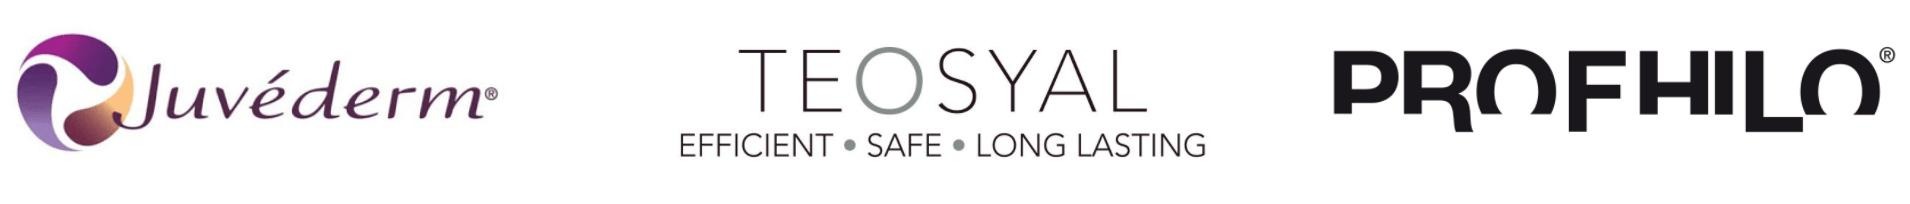 Juvederm, Teosyal and Profhilo logos